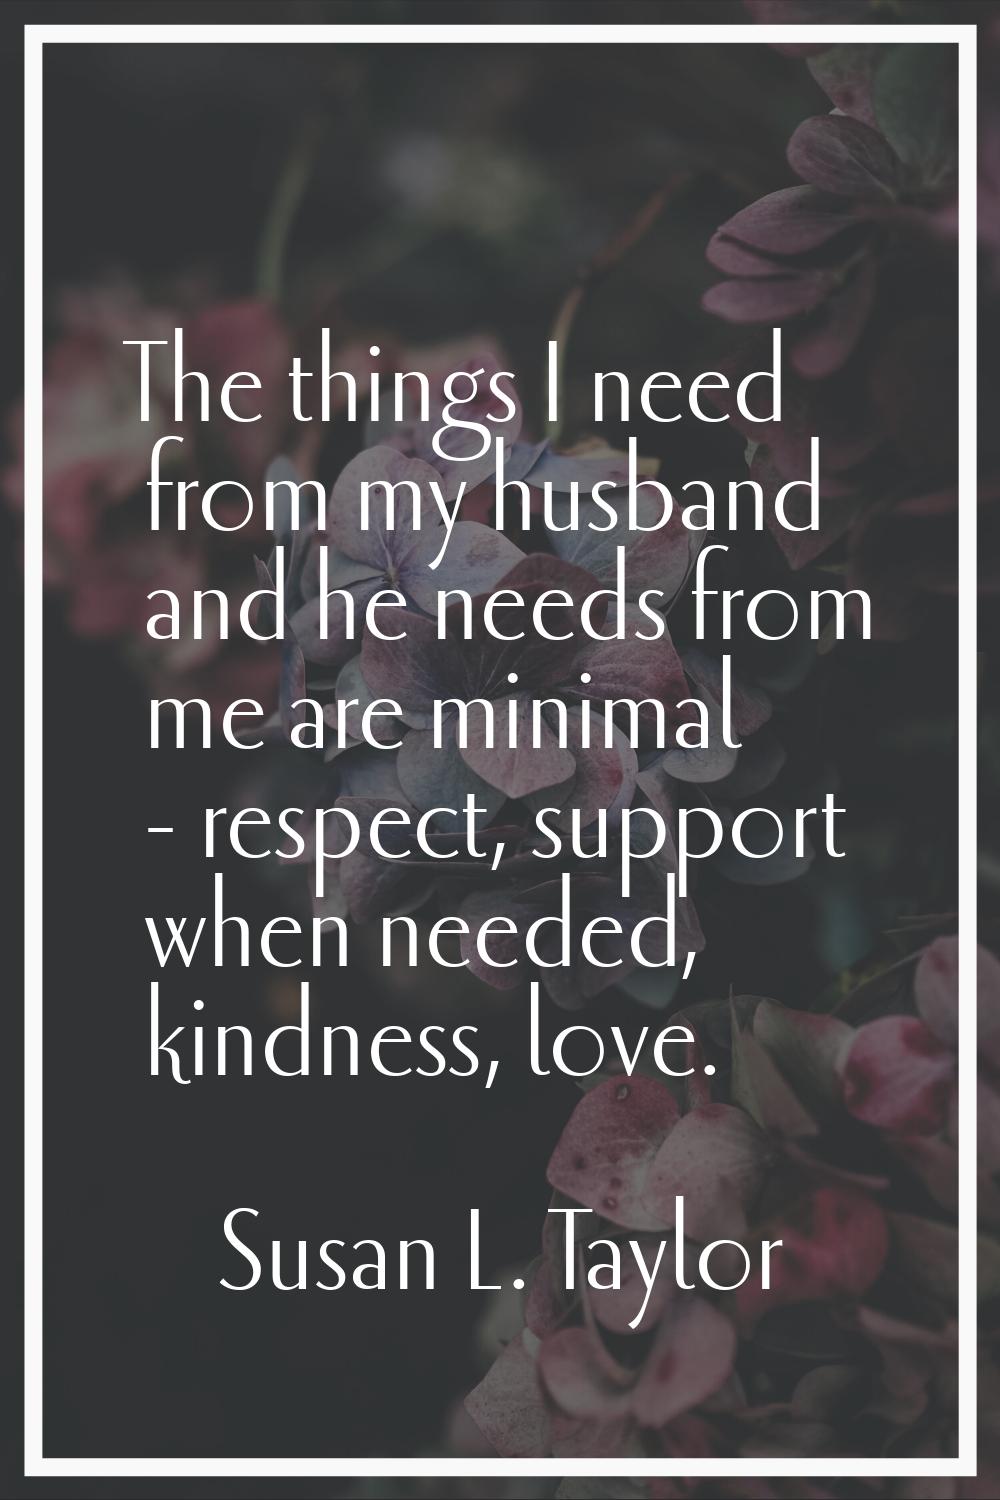 The things I need from my husband and he needs from me are minimal - respect, support when needed, 